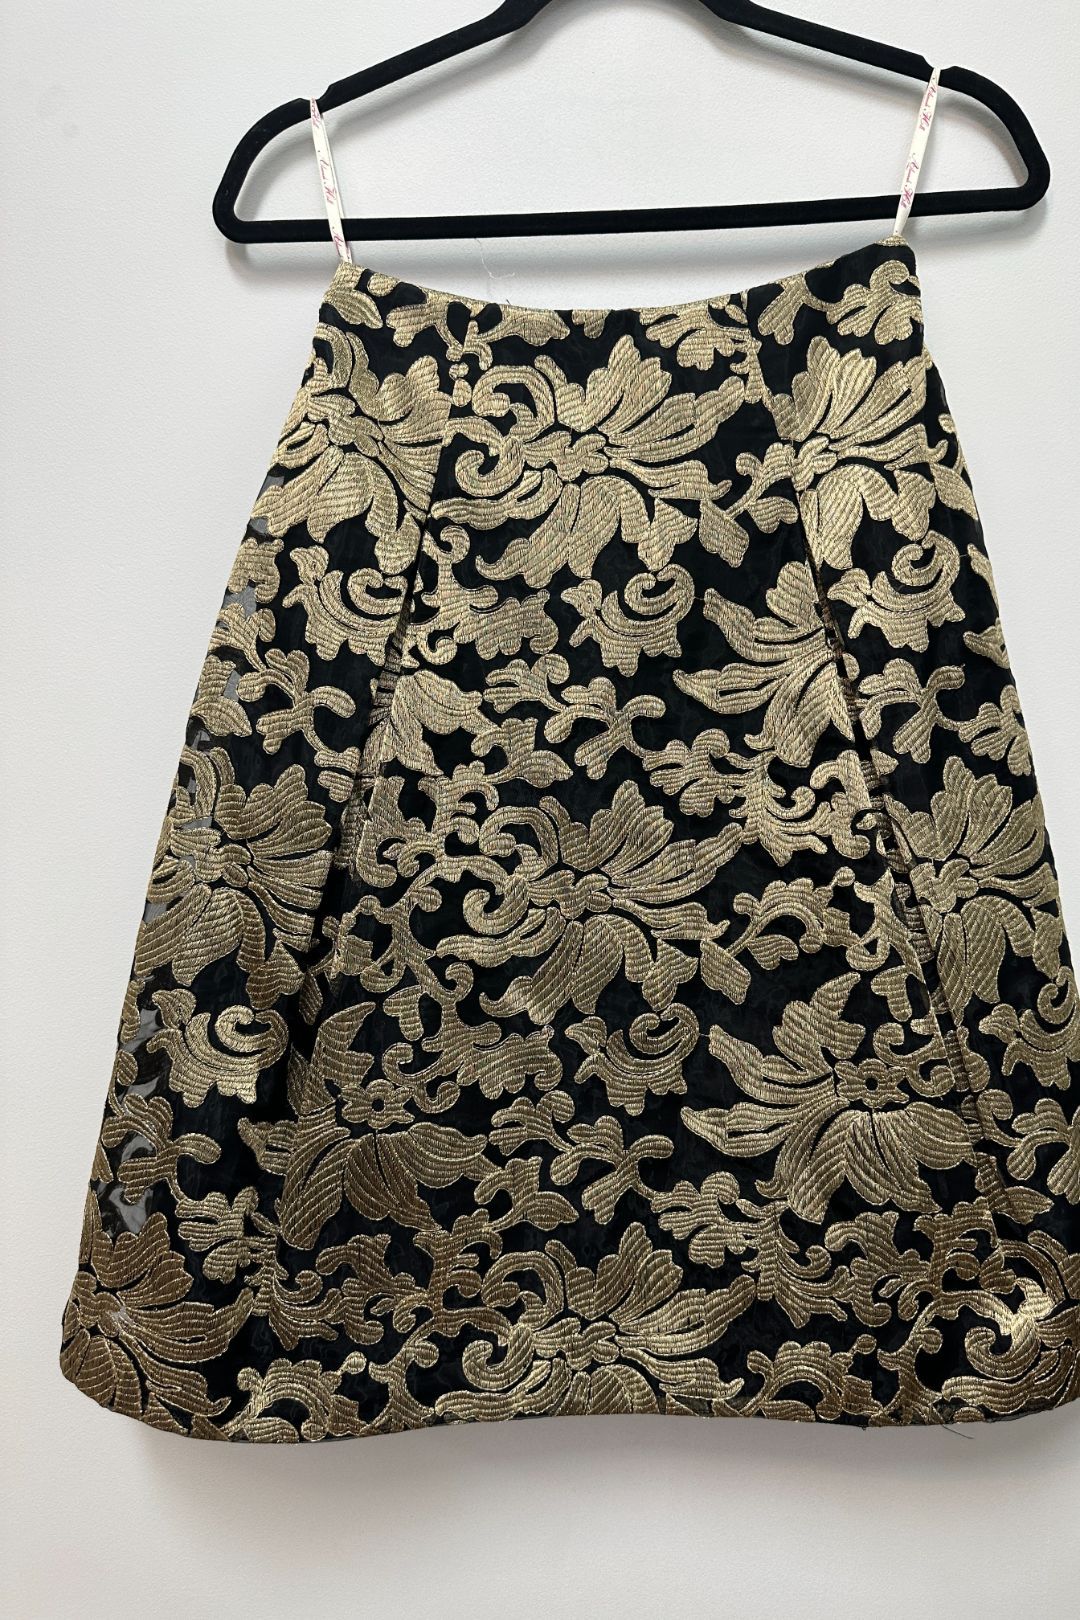 Alannah Hill	Black and Gold Fantasy Love Is Better Skirt